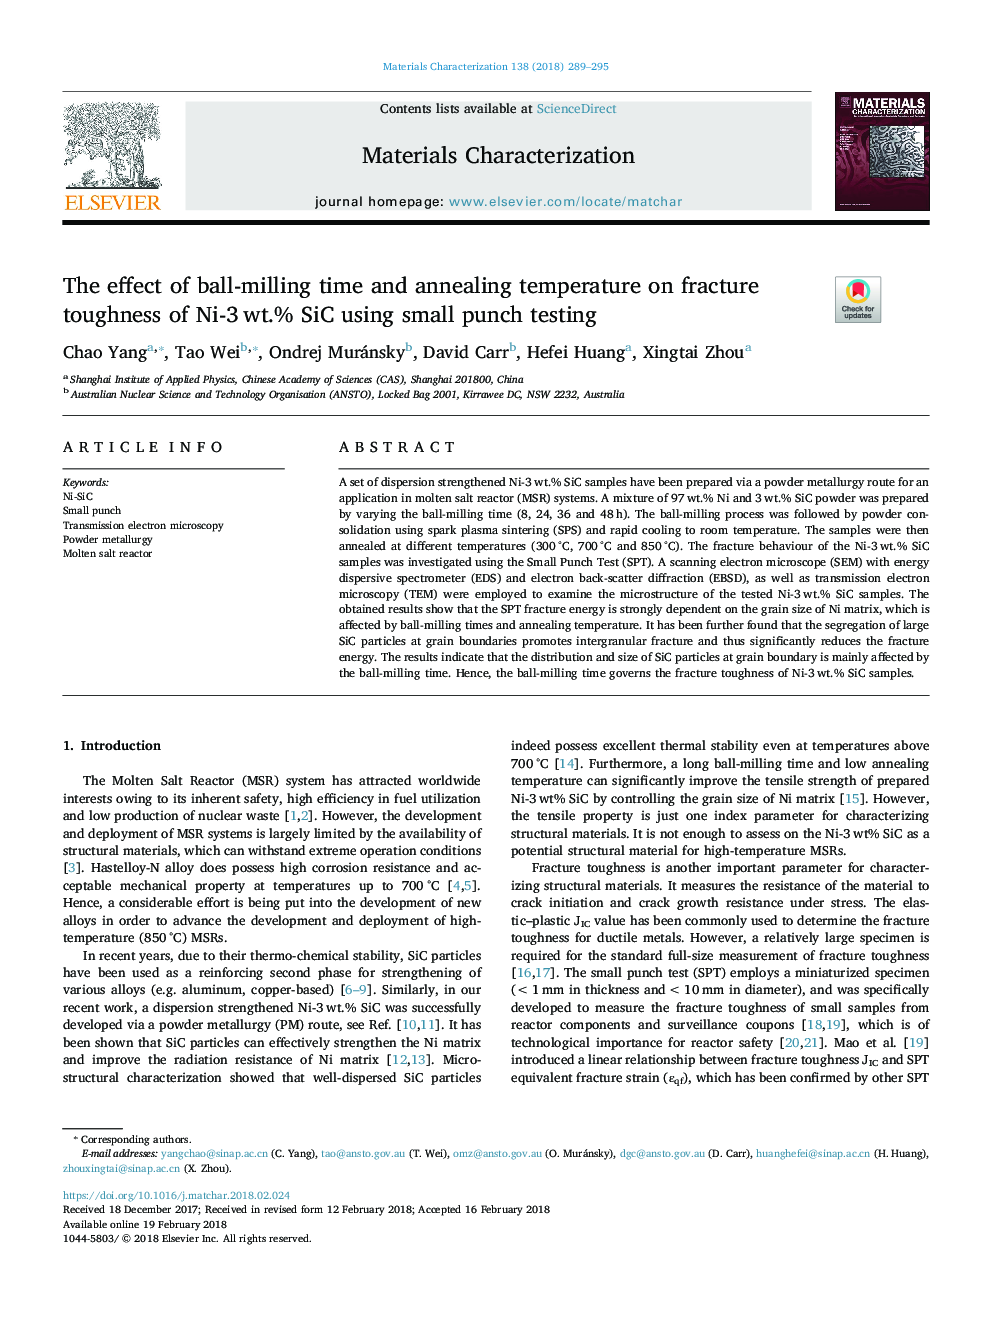 The effect of ball-milling time and annealing temperature on fracture toughness of Ni-3â¯wt.% SiC using small punch testing